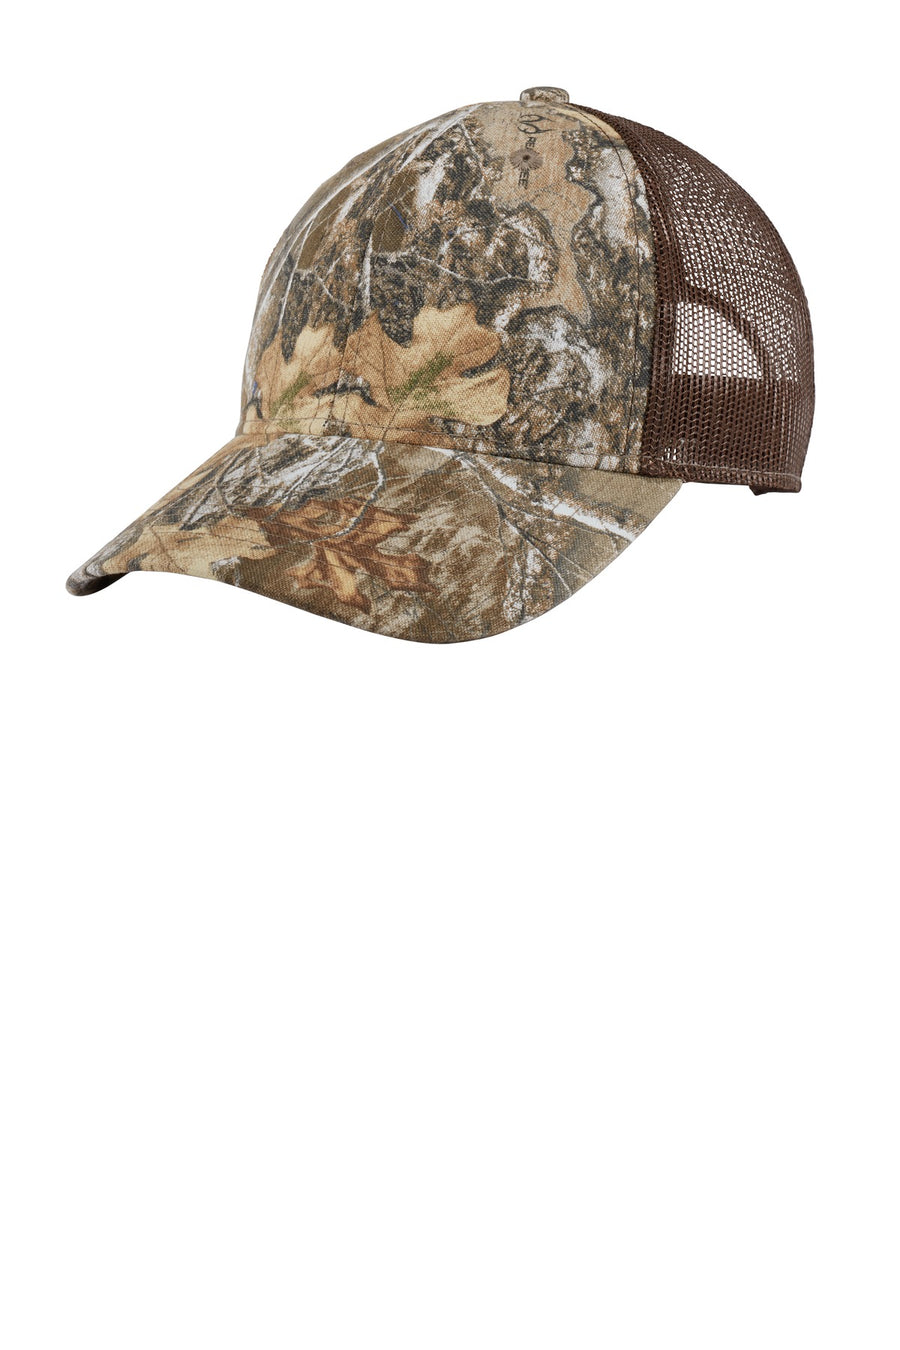 Port Authority Structured Camouflage Mesh Back Cap.